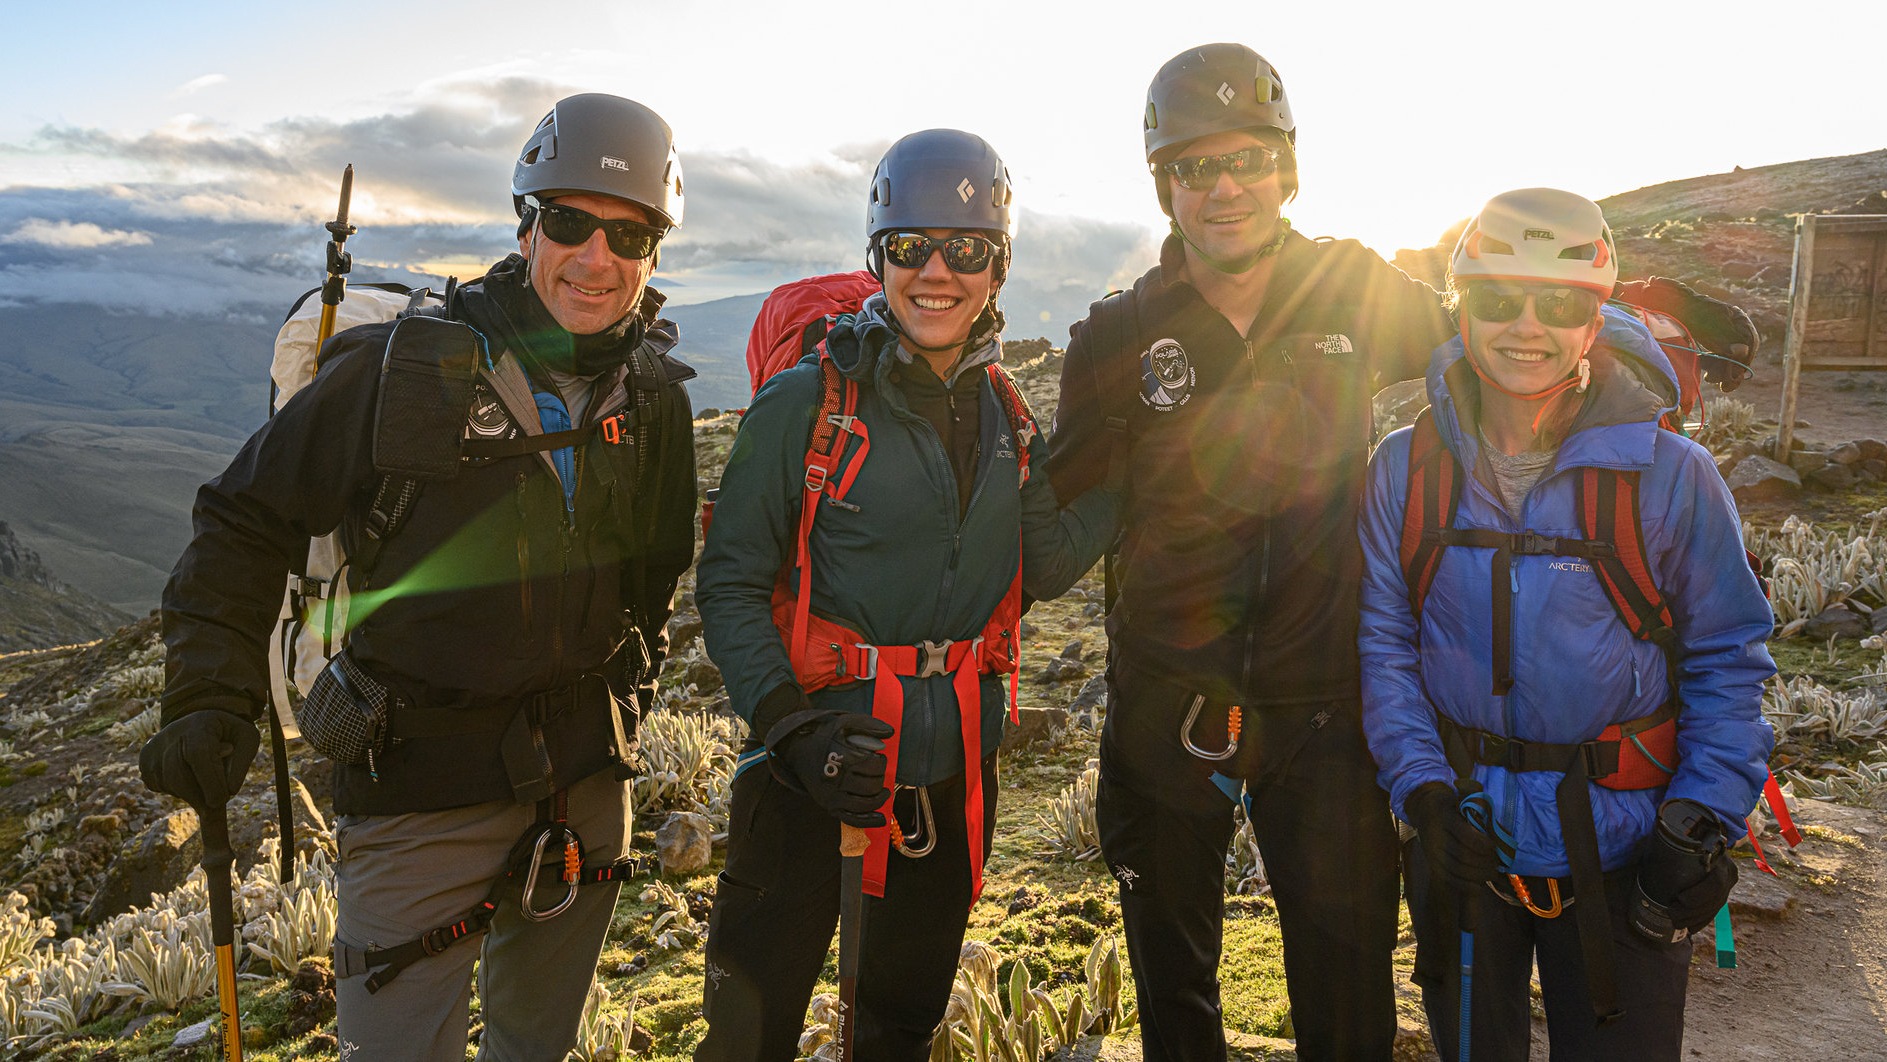 four astronauts hiking in the mountains with the sun shining behind